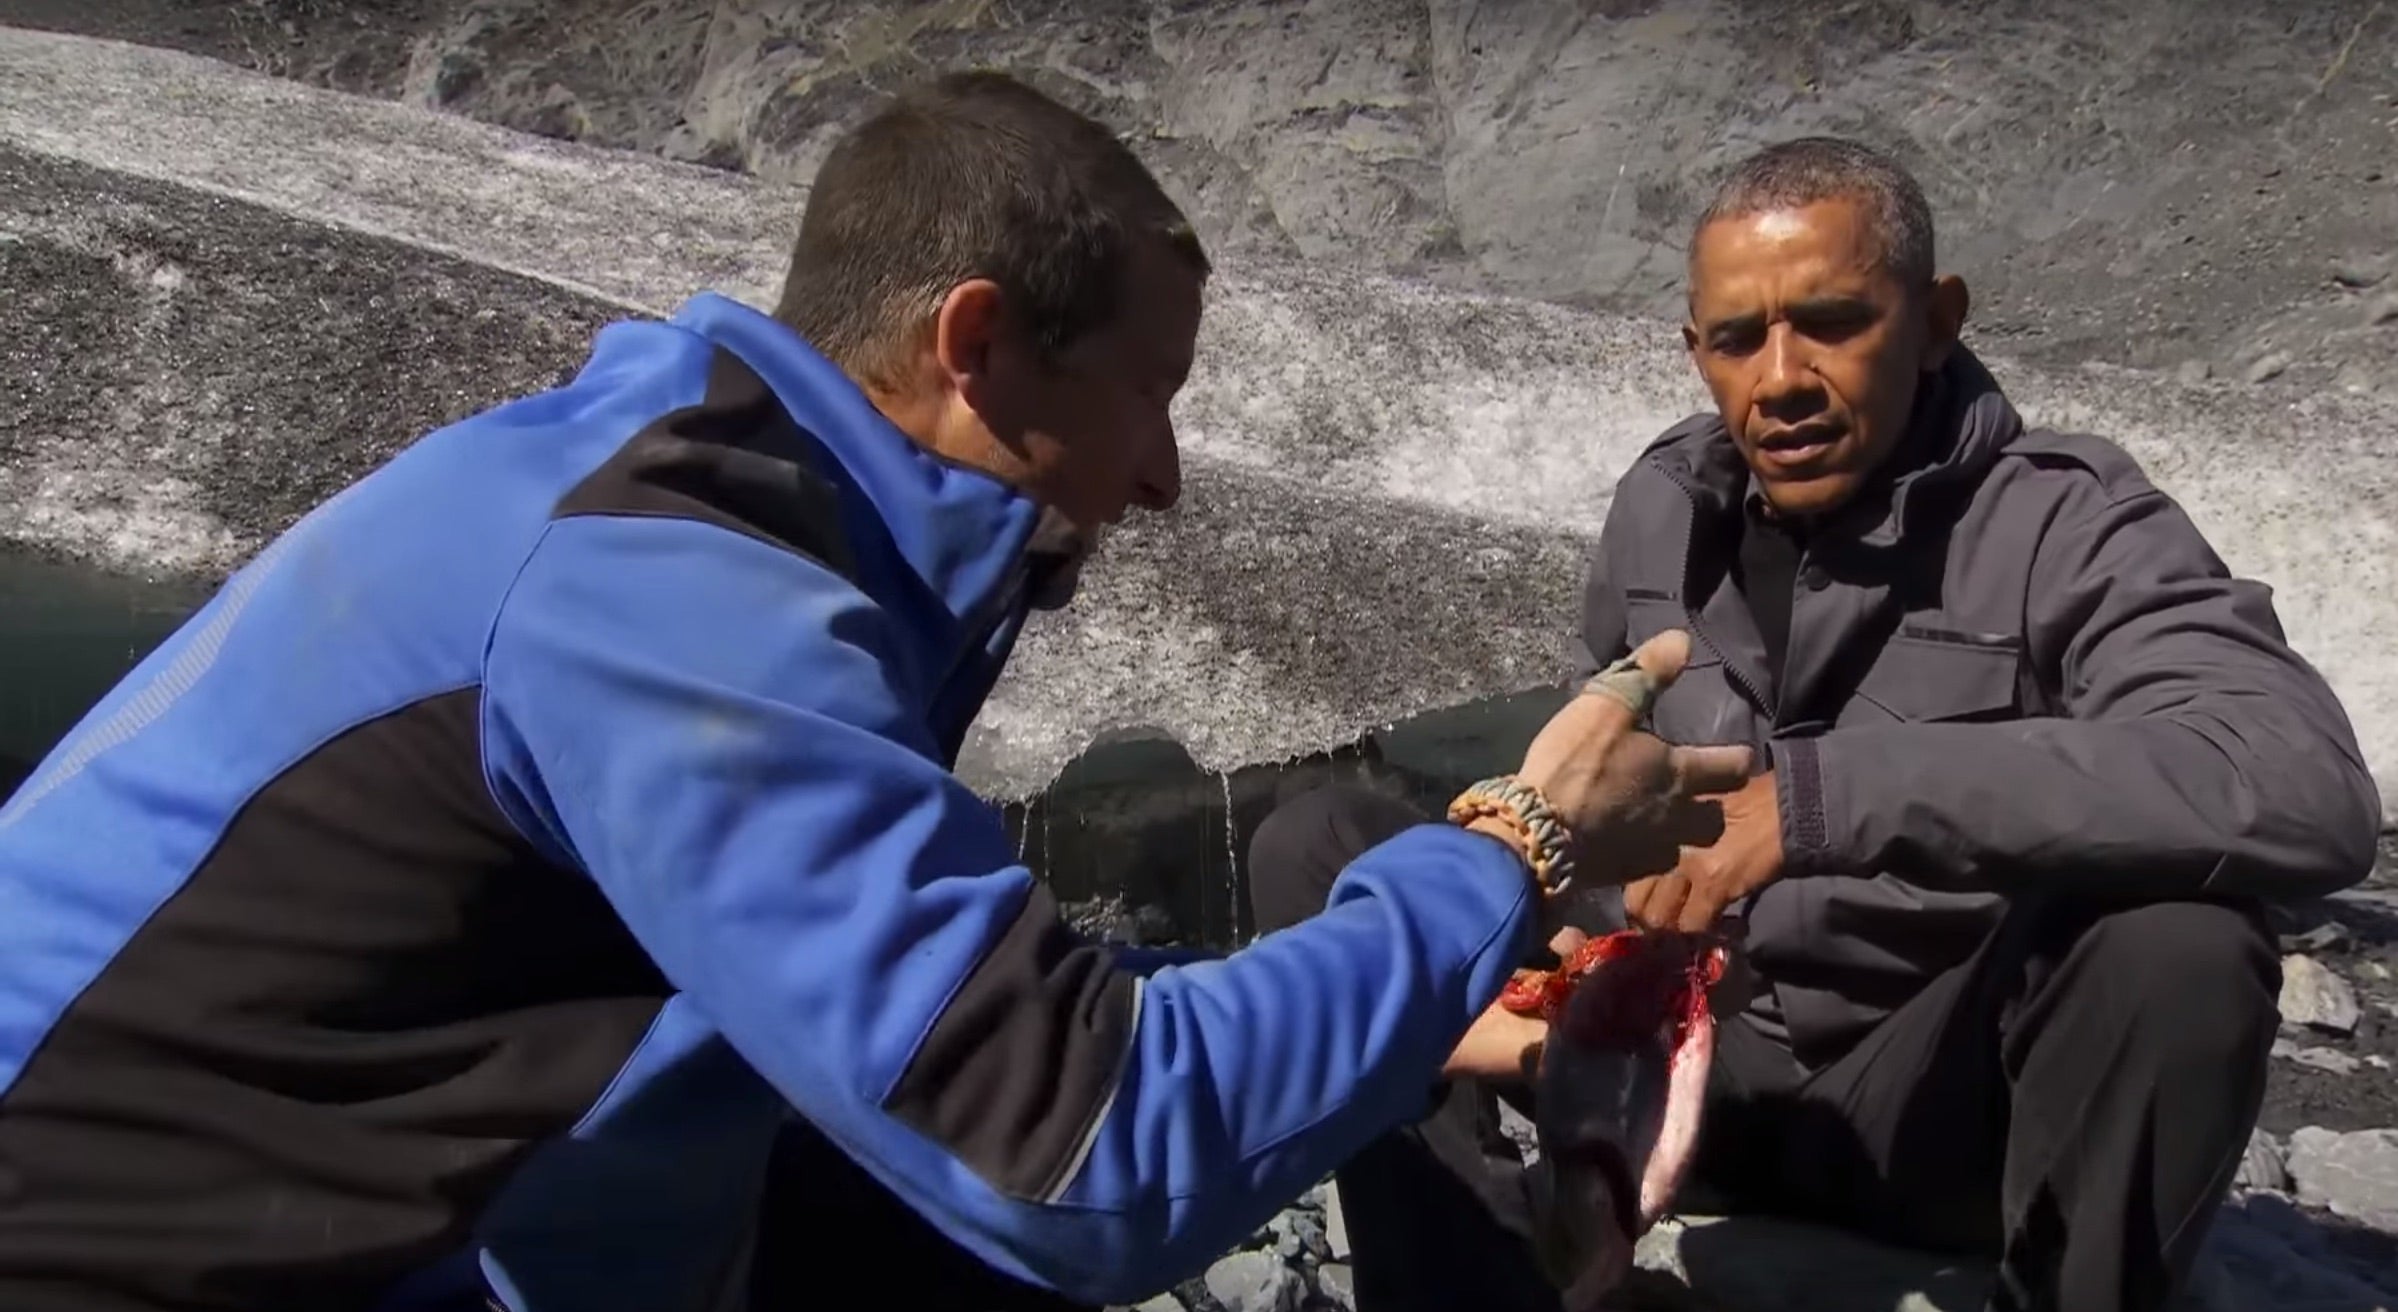 President Barack Obama was featured on Running Wild with Bear Grylls